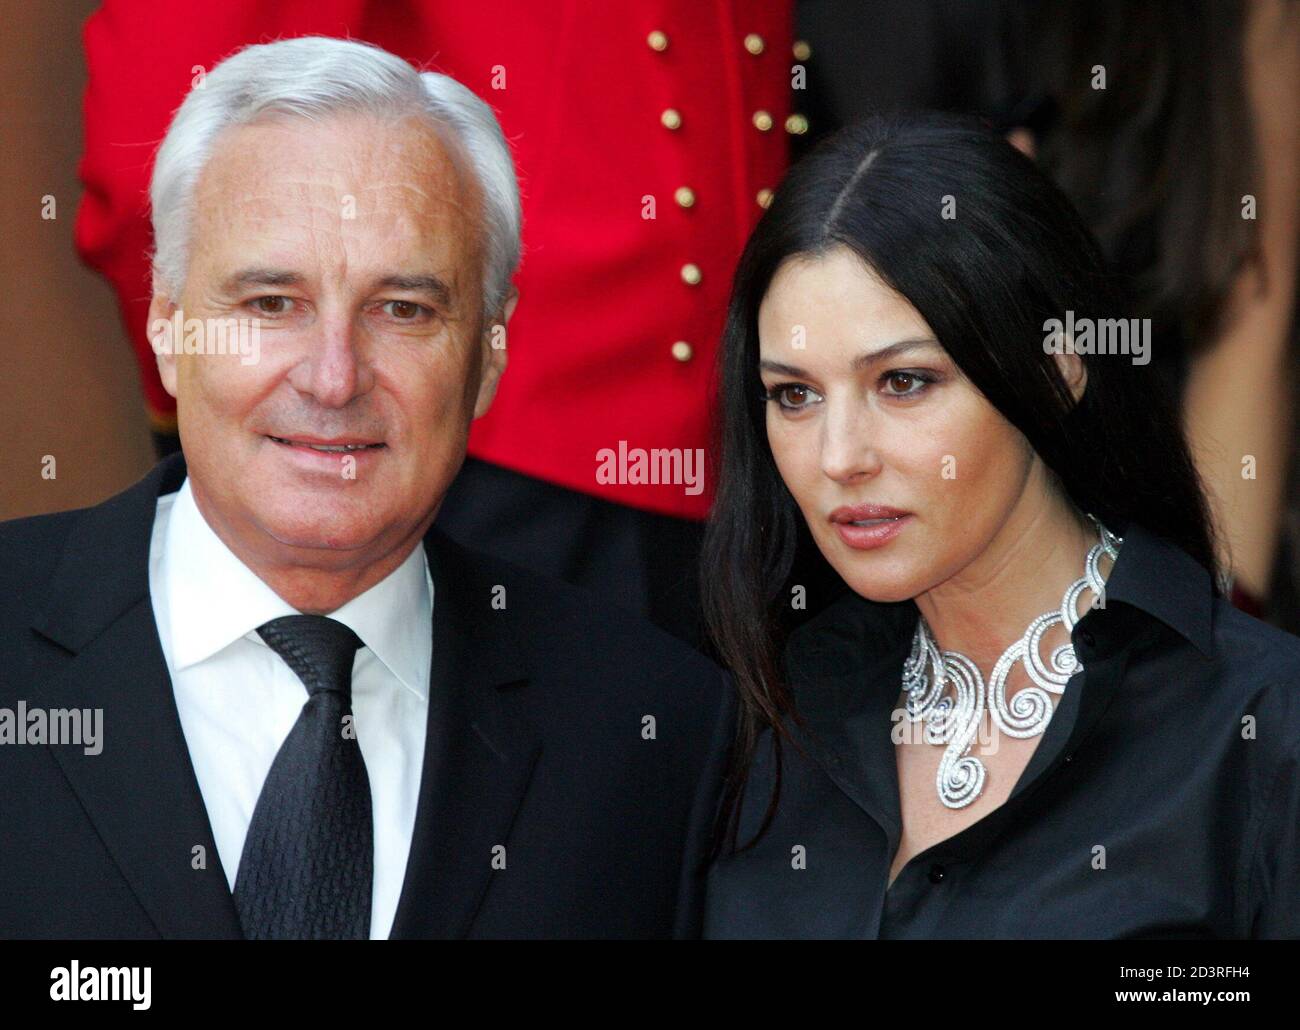 Bernard Fornas (L), president and CEO of Cartier International, poses with  Italian actress Monica Bellucci as they arrive for a presentation of the  new Cartier collection in Moscow June 2, 2005. They